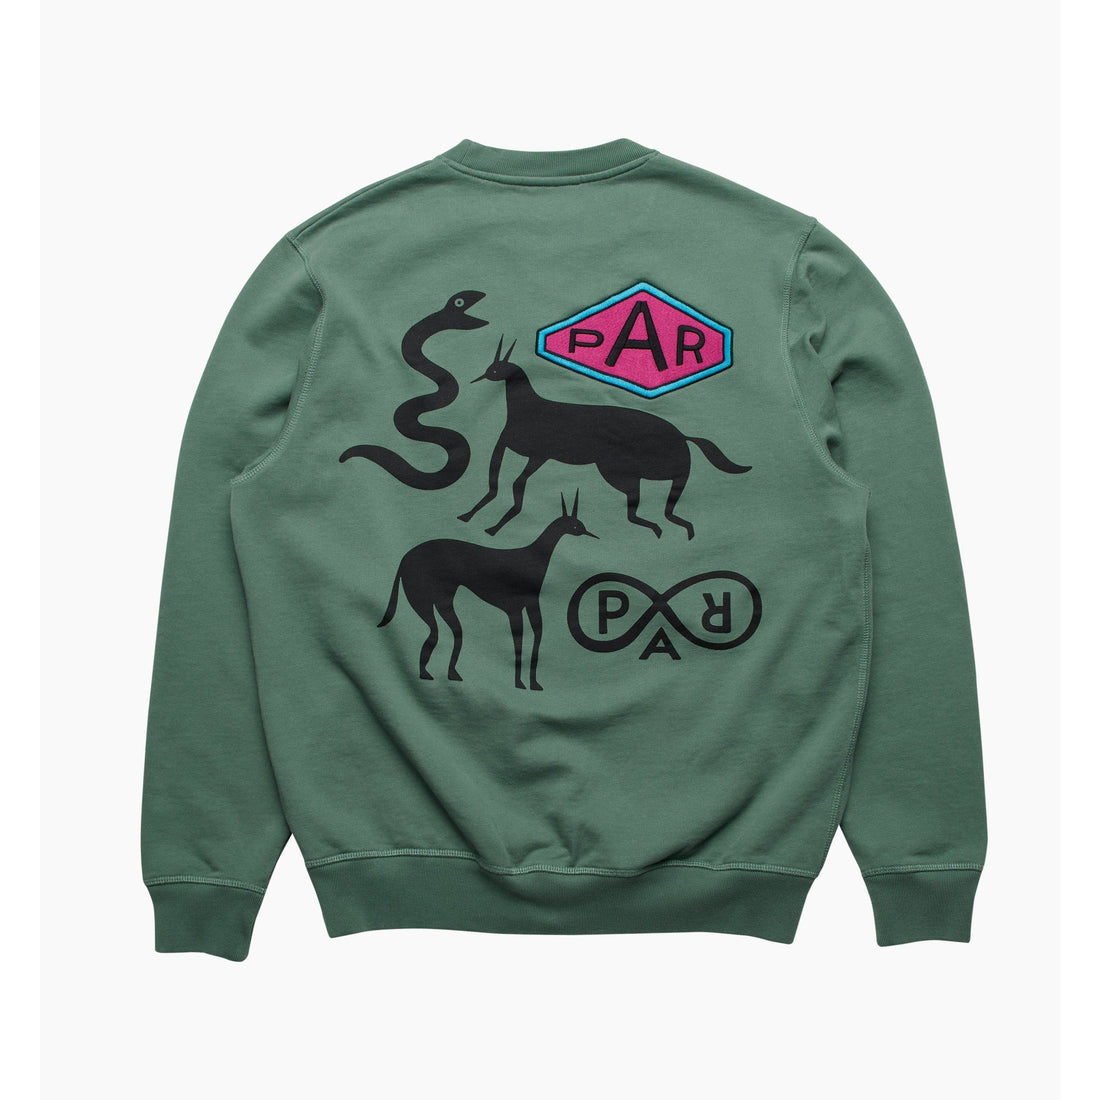 BY PARRA - SNAKED BY A HORSE CREWNECK - PINE GREEN